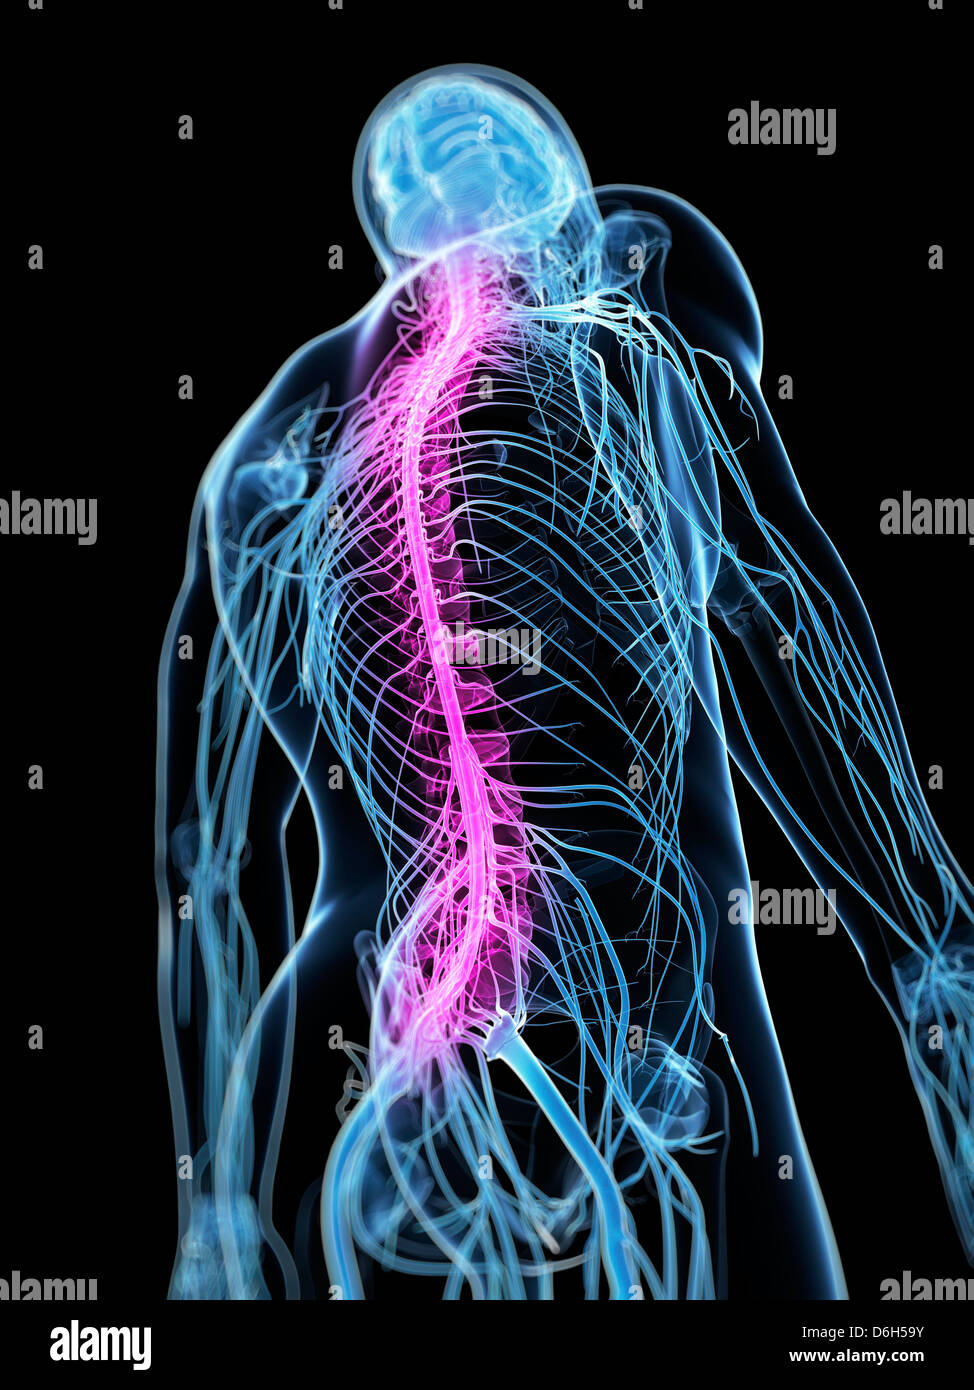 Healthy spinal cord, artwork Stock Photo